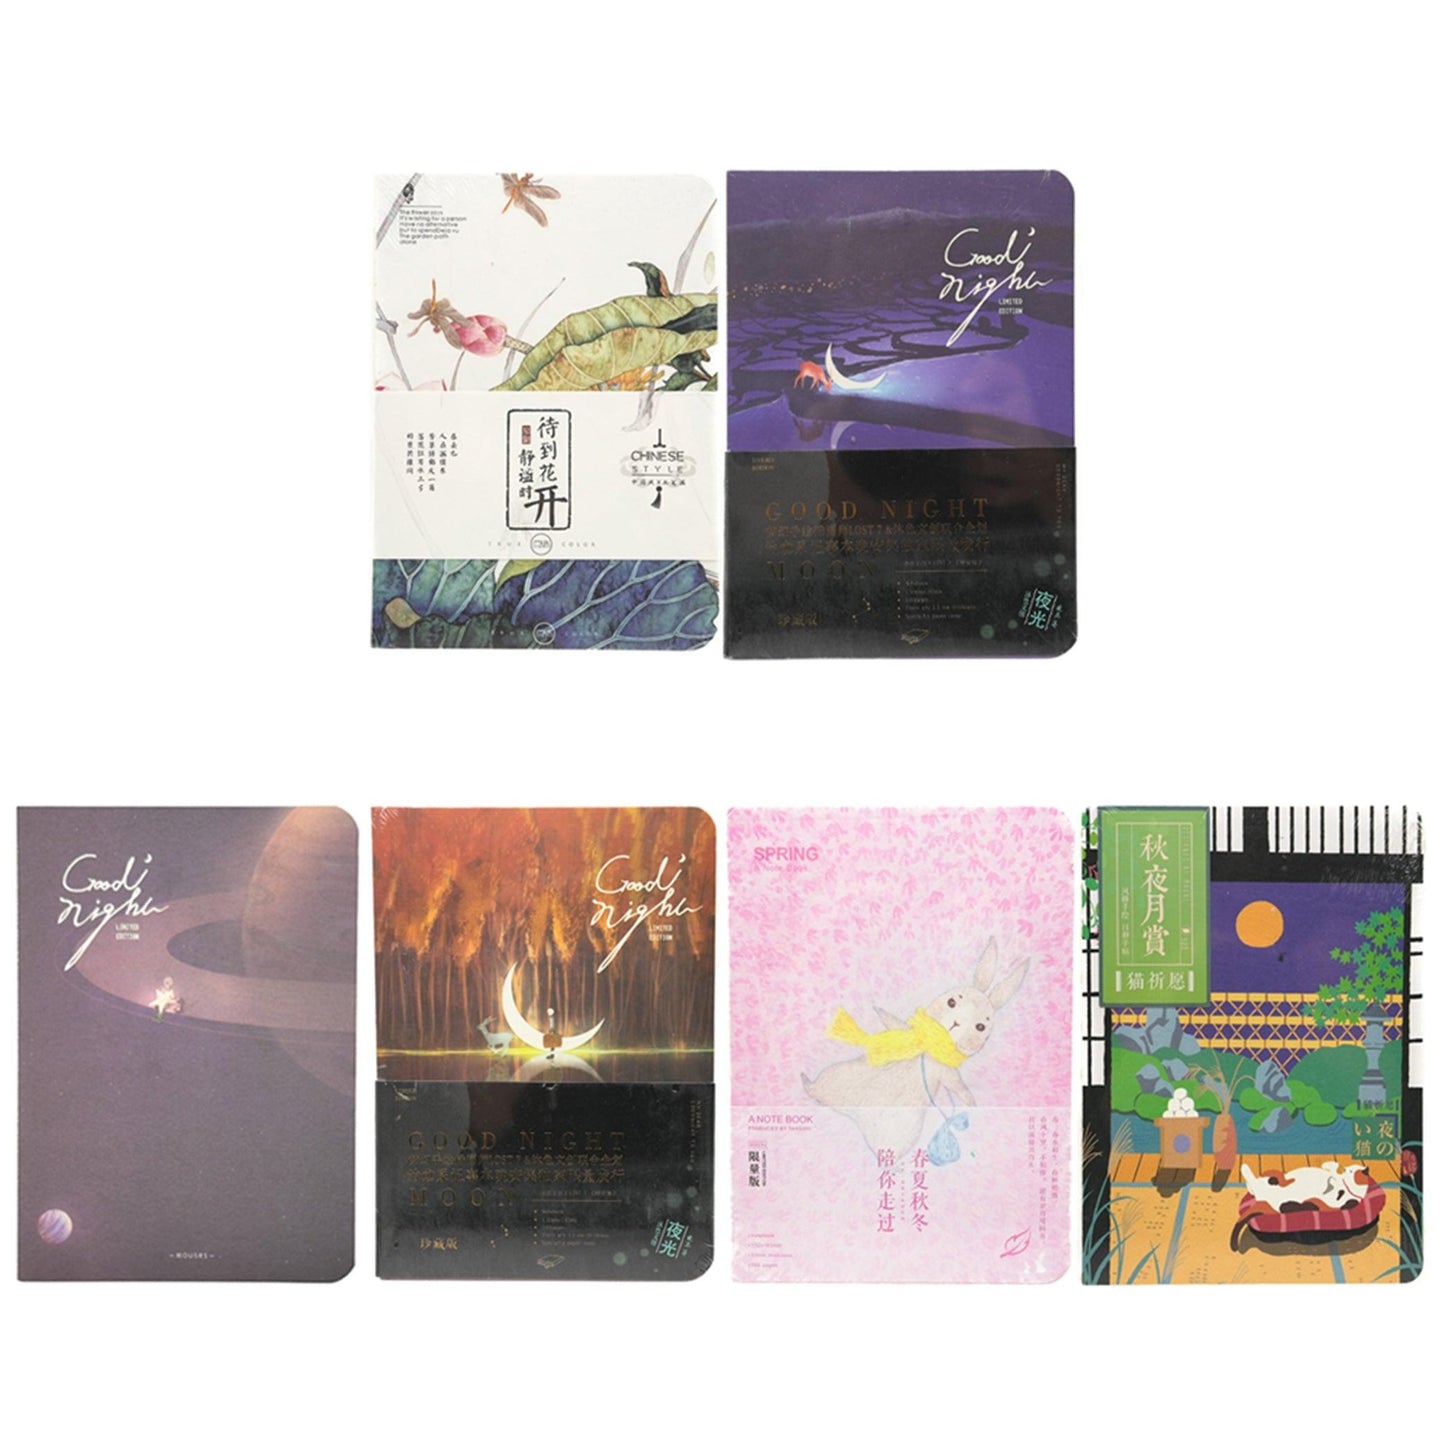 Notebook, Picking up Light, Muse Wenchuang, Hand-painted Cover, Healing Department, Notes, Memo, Record, Random Shipment NP-H7TGI-305 - CHL-STORE 